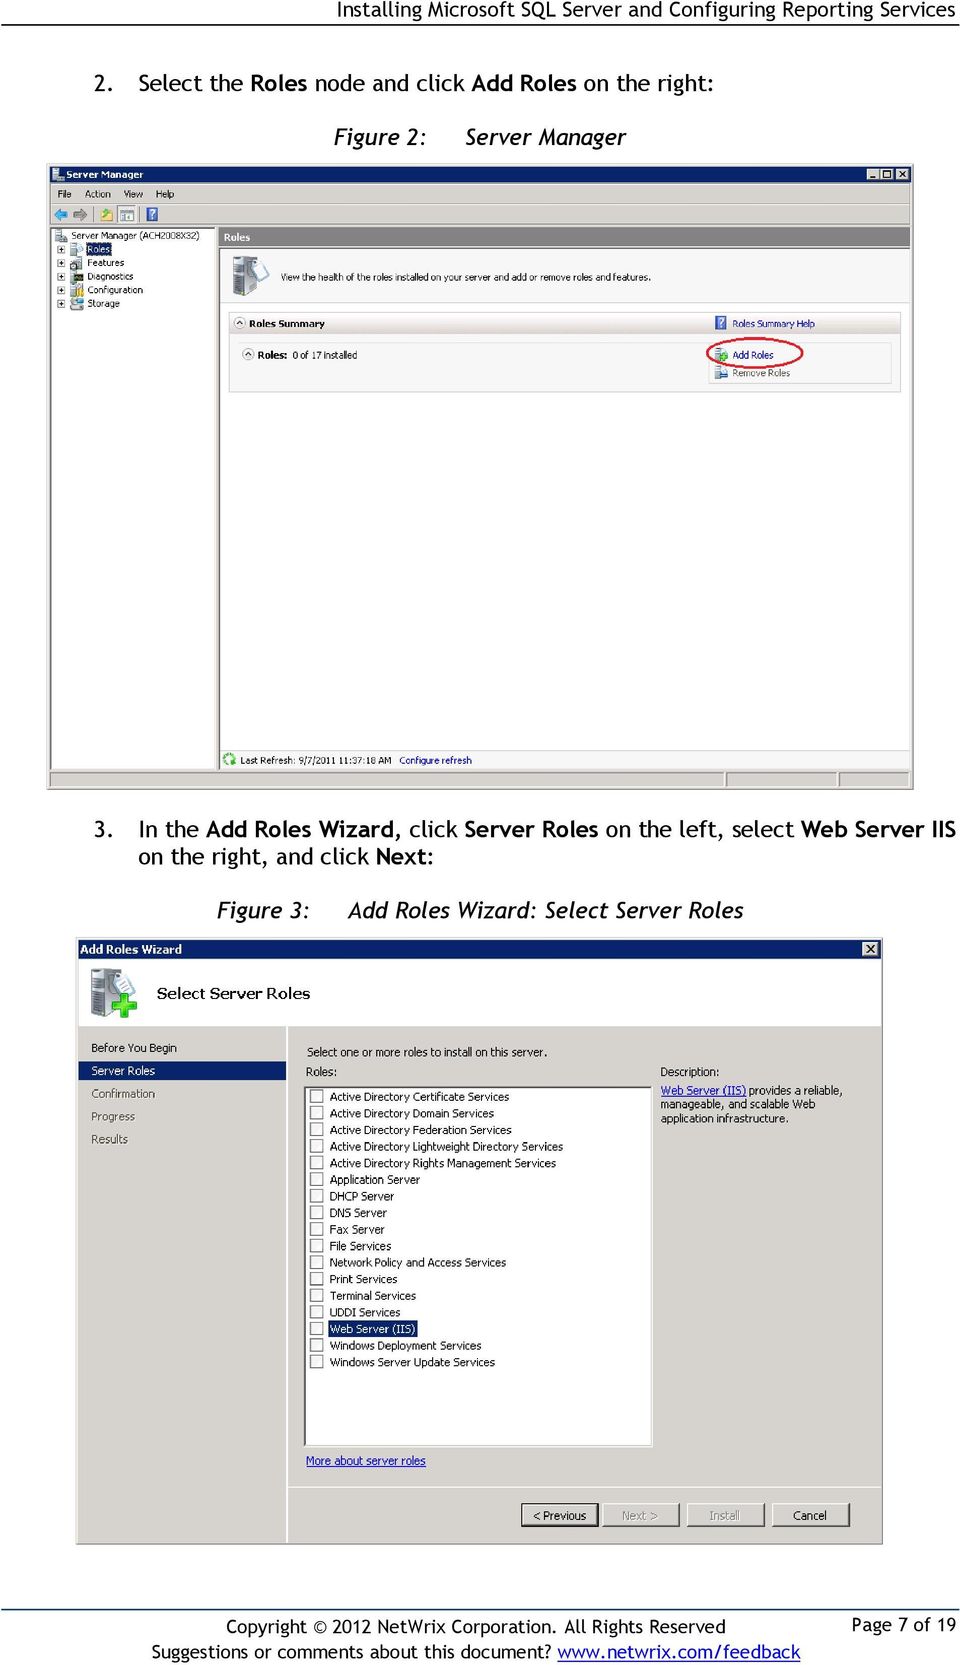 In the Add Roles Wizard, click Server Roles on the left, select